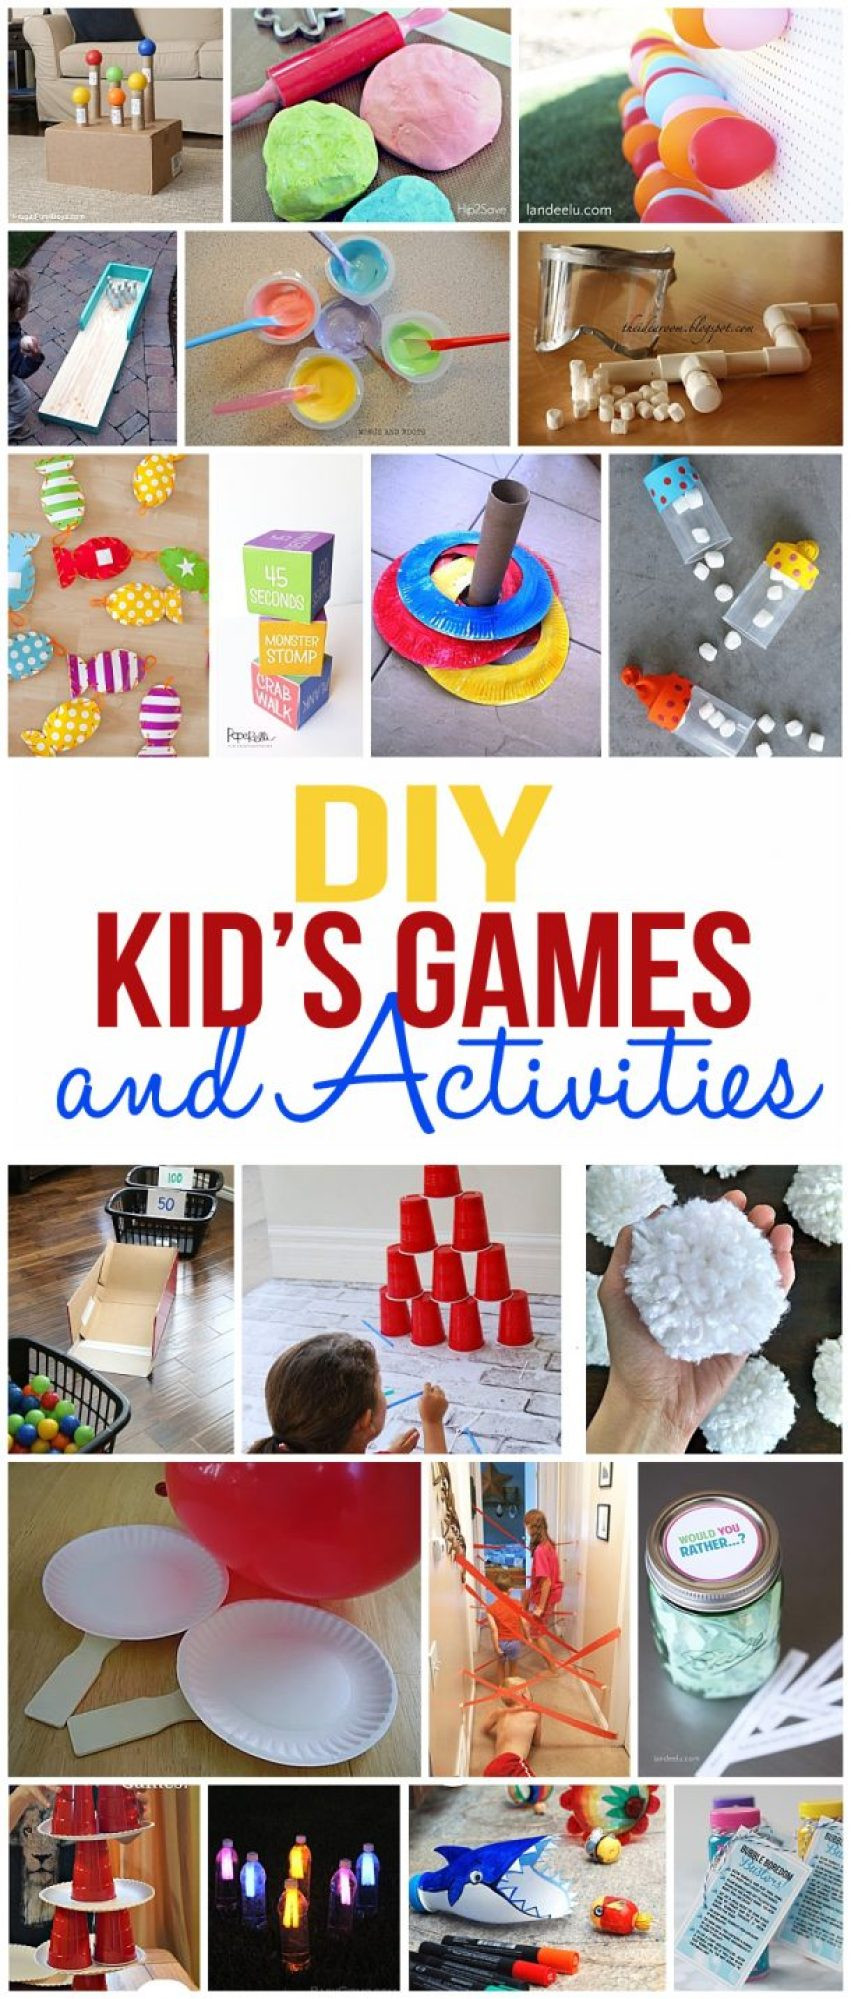 DIY Activities For Kids
 DIY Kids Games and Activities for Indoors or Outdoors